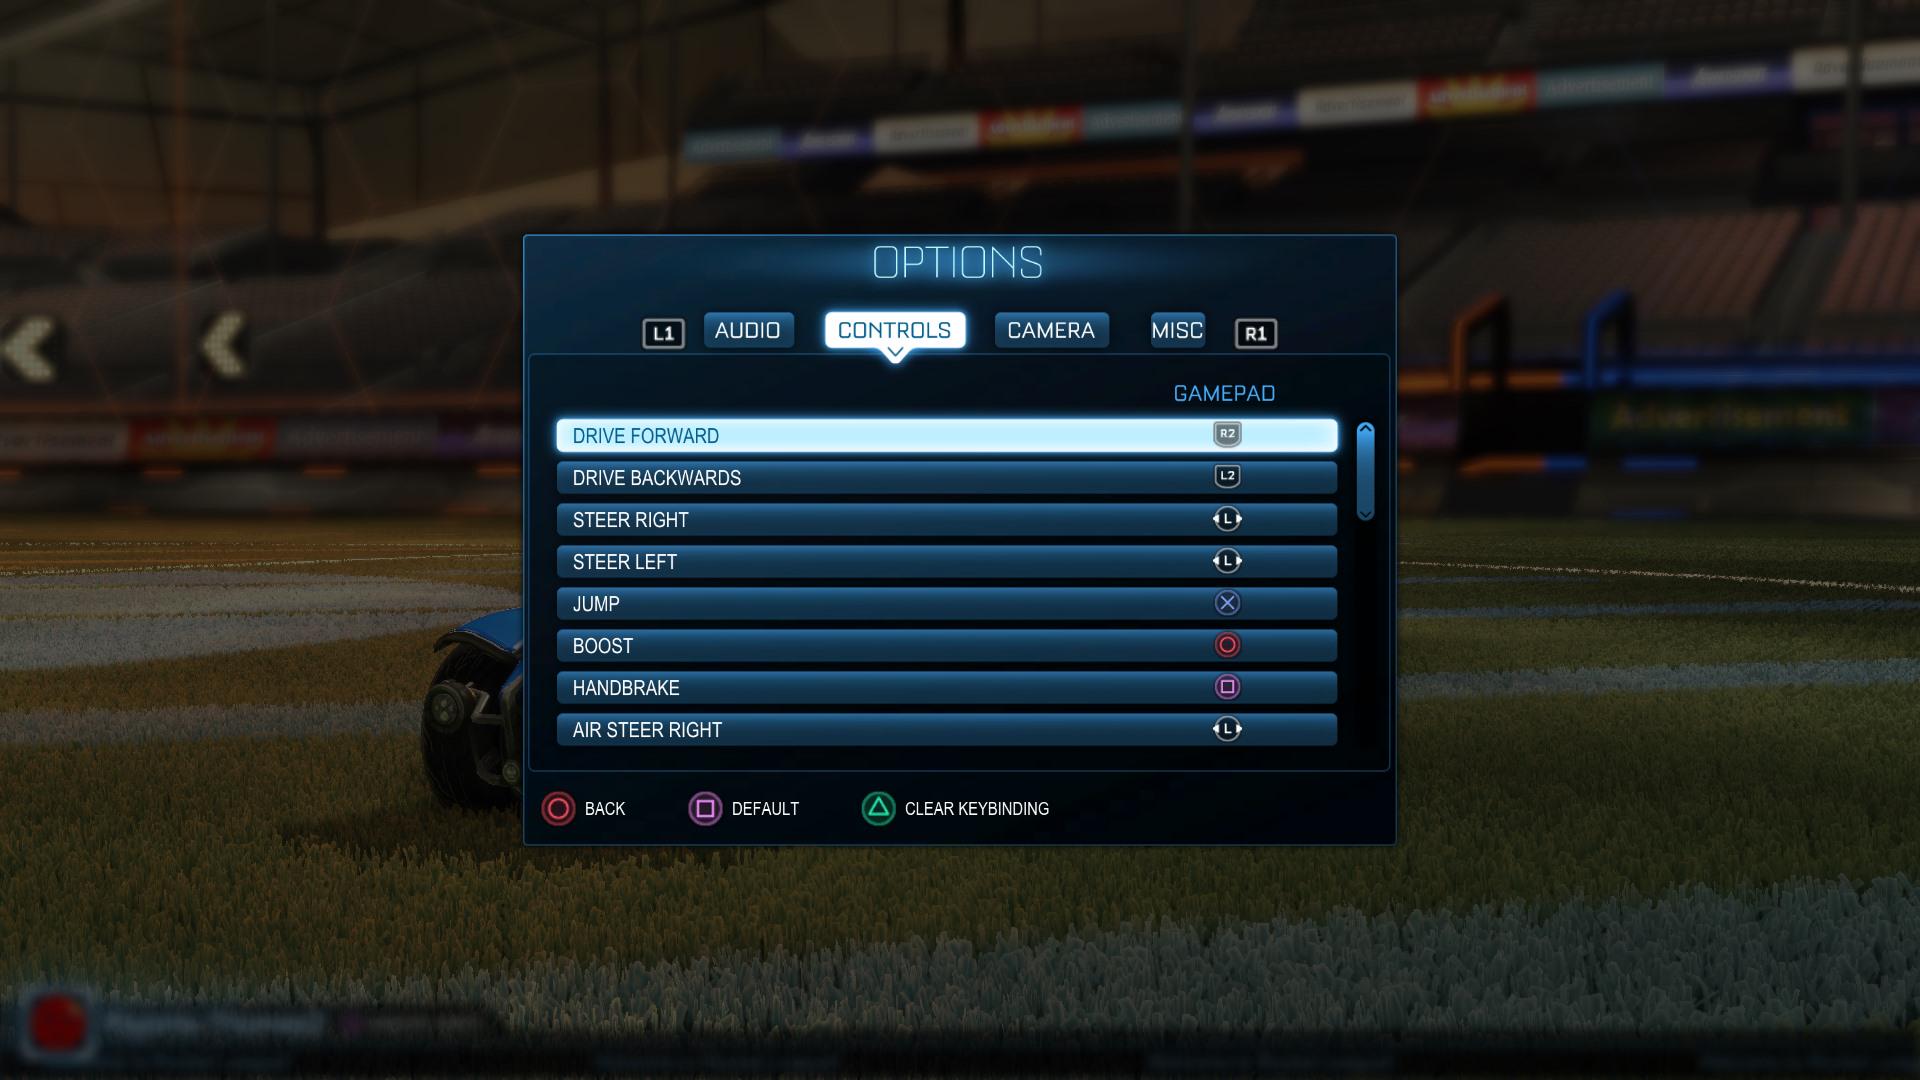 Rocket League en Twitter: "Verified: We WILL have FULLY-CUSTOMIZABLE controls in Rocket League for both PC AND PS4! Take a look! Twitter